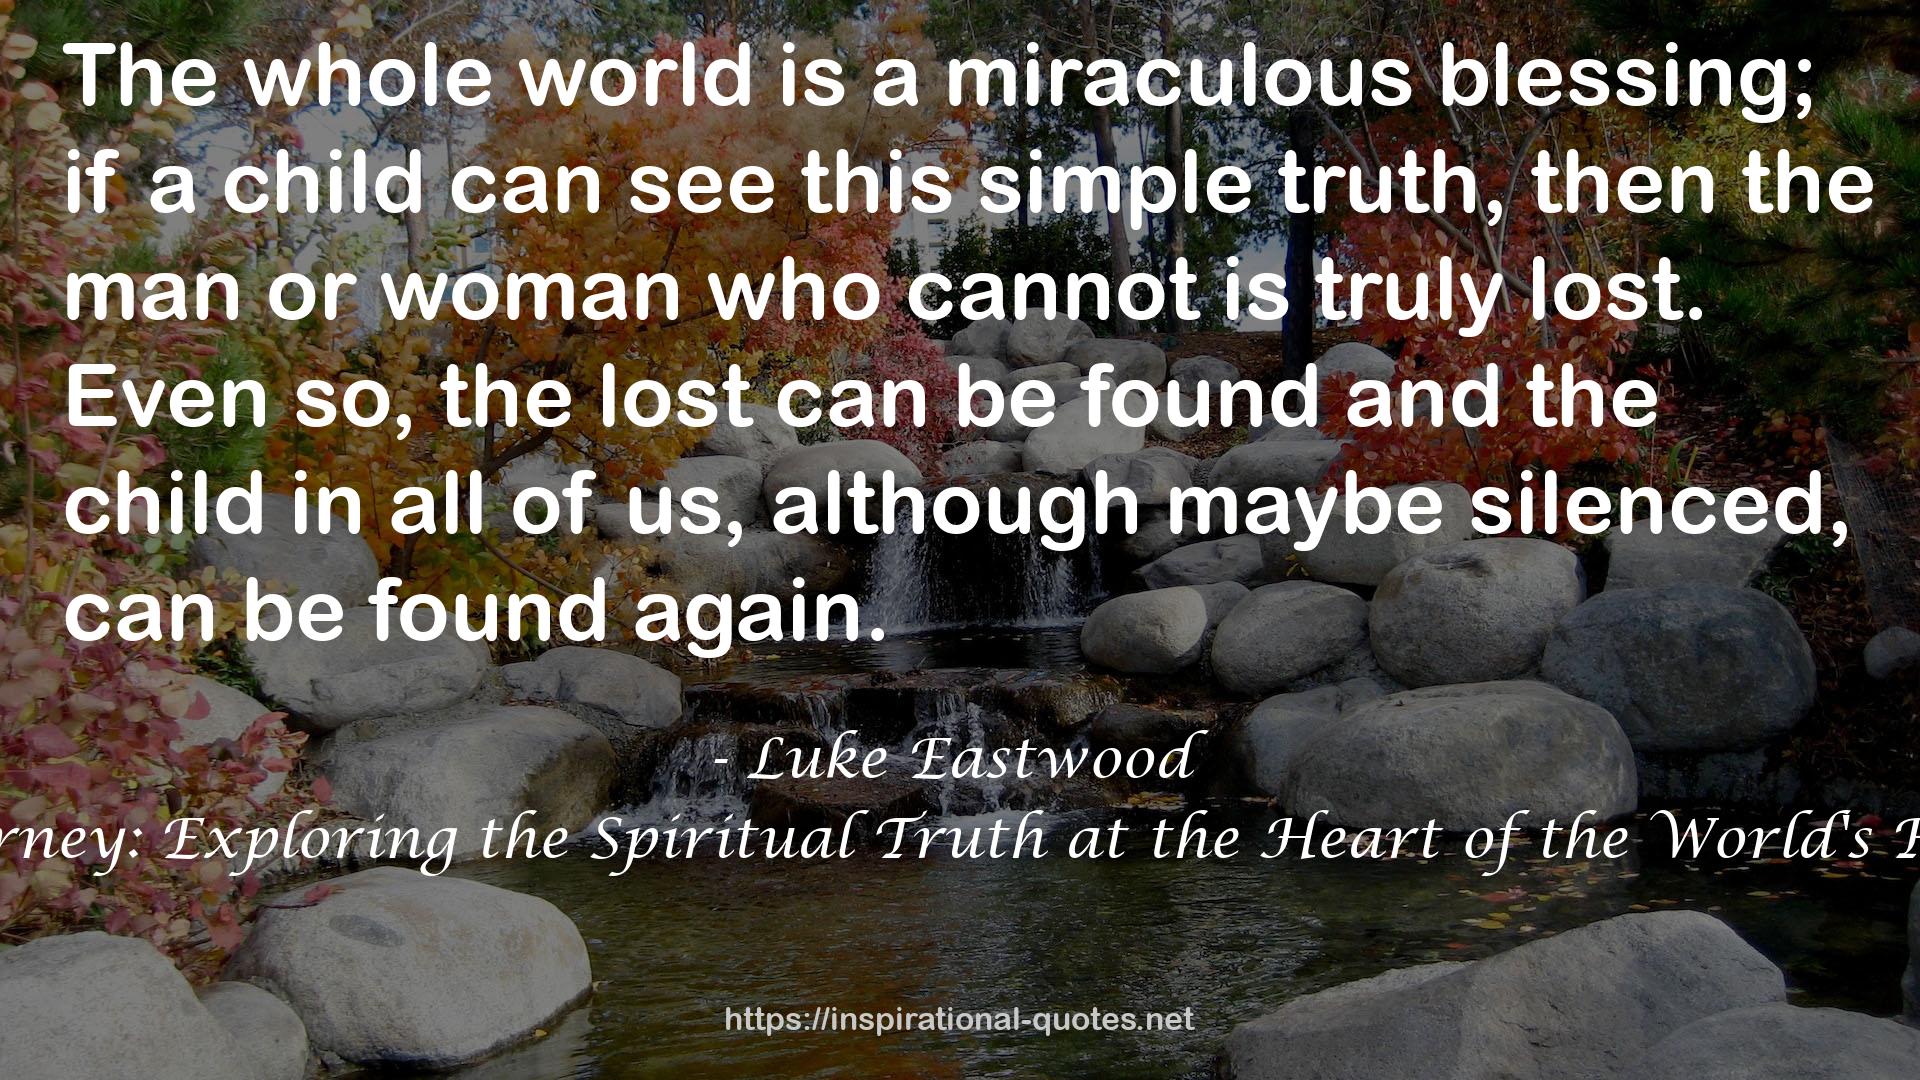 The Journey: Exploring the Spiritual Truth at the Heart of the World's Religions QUOTES